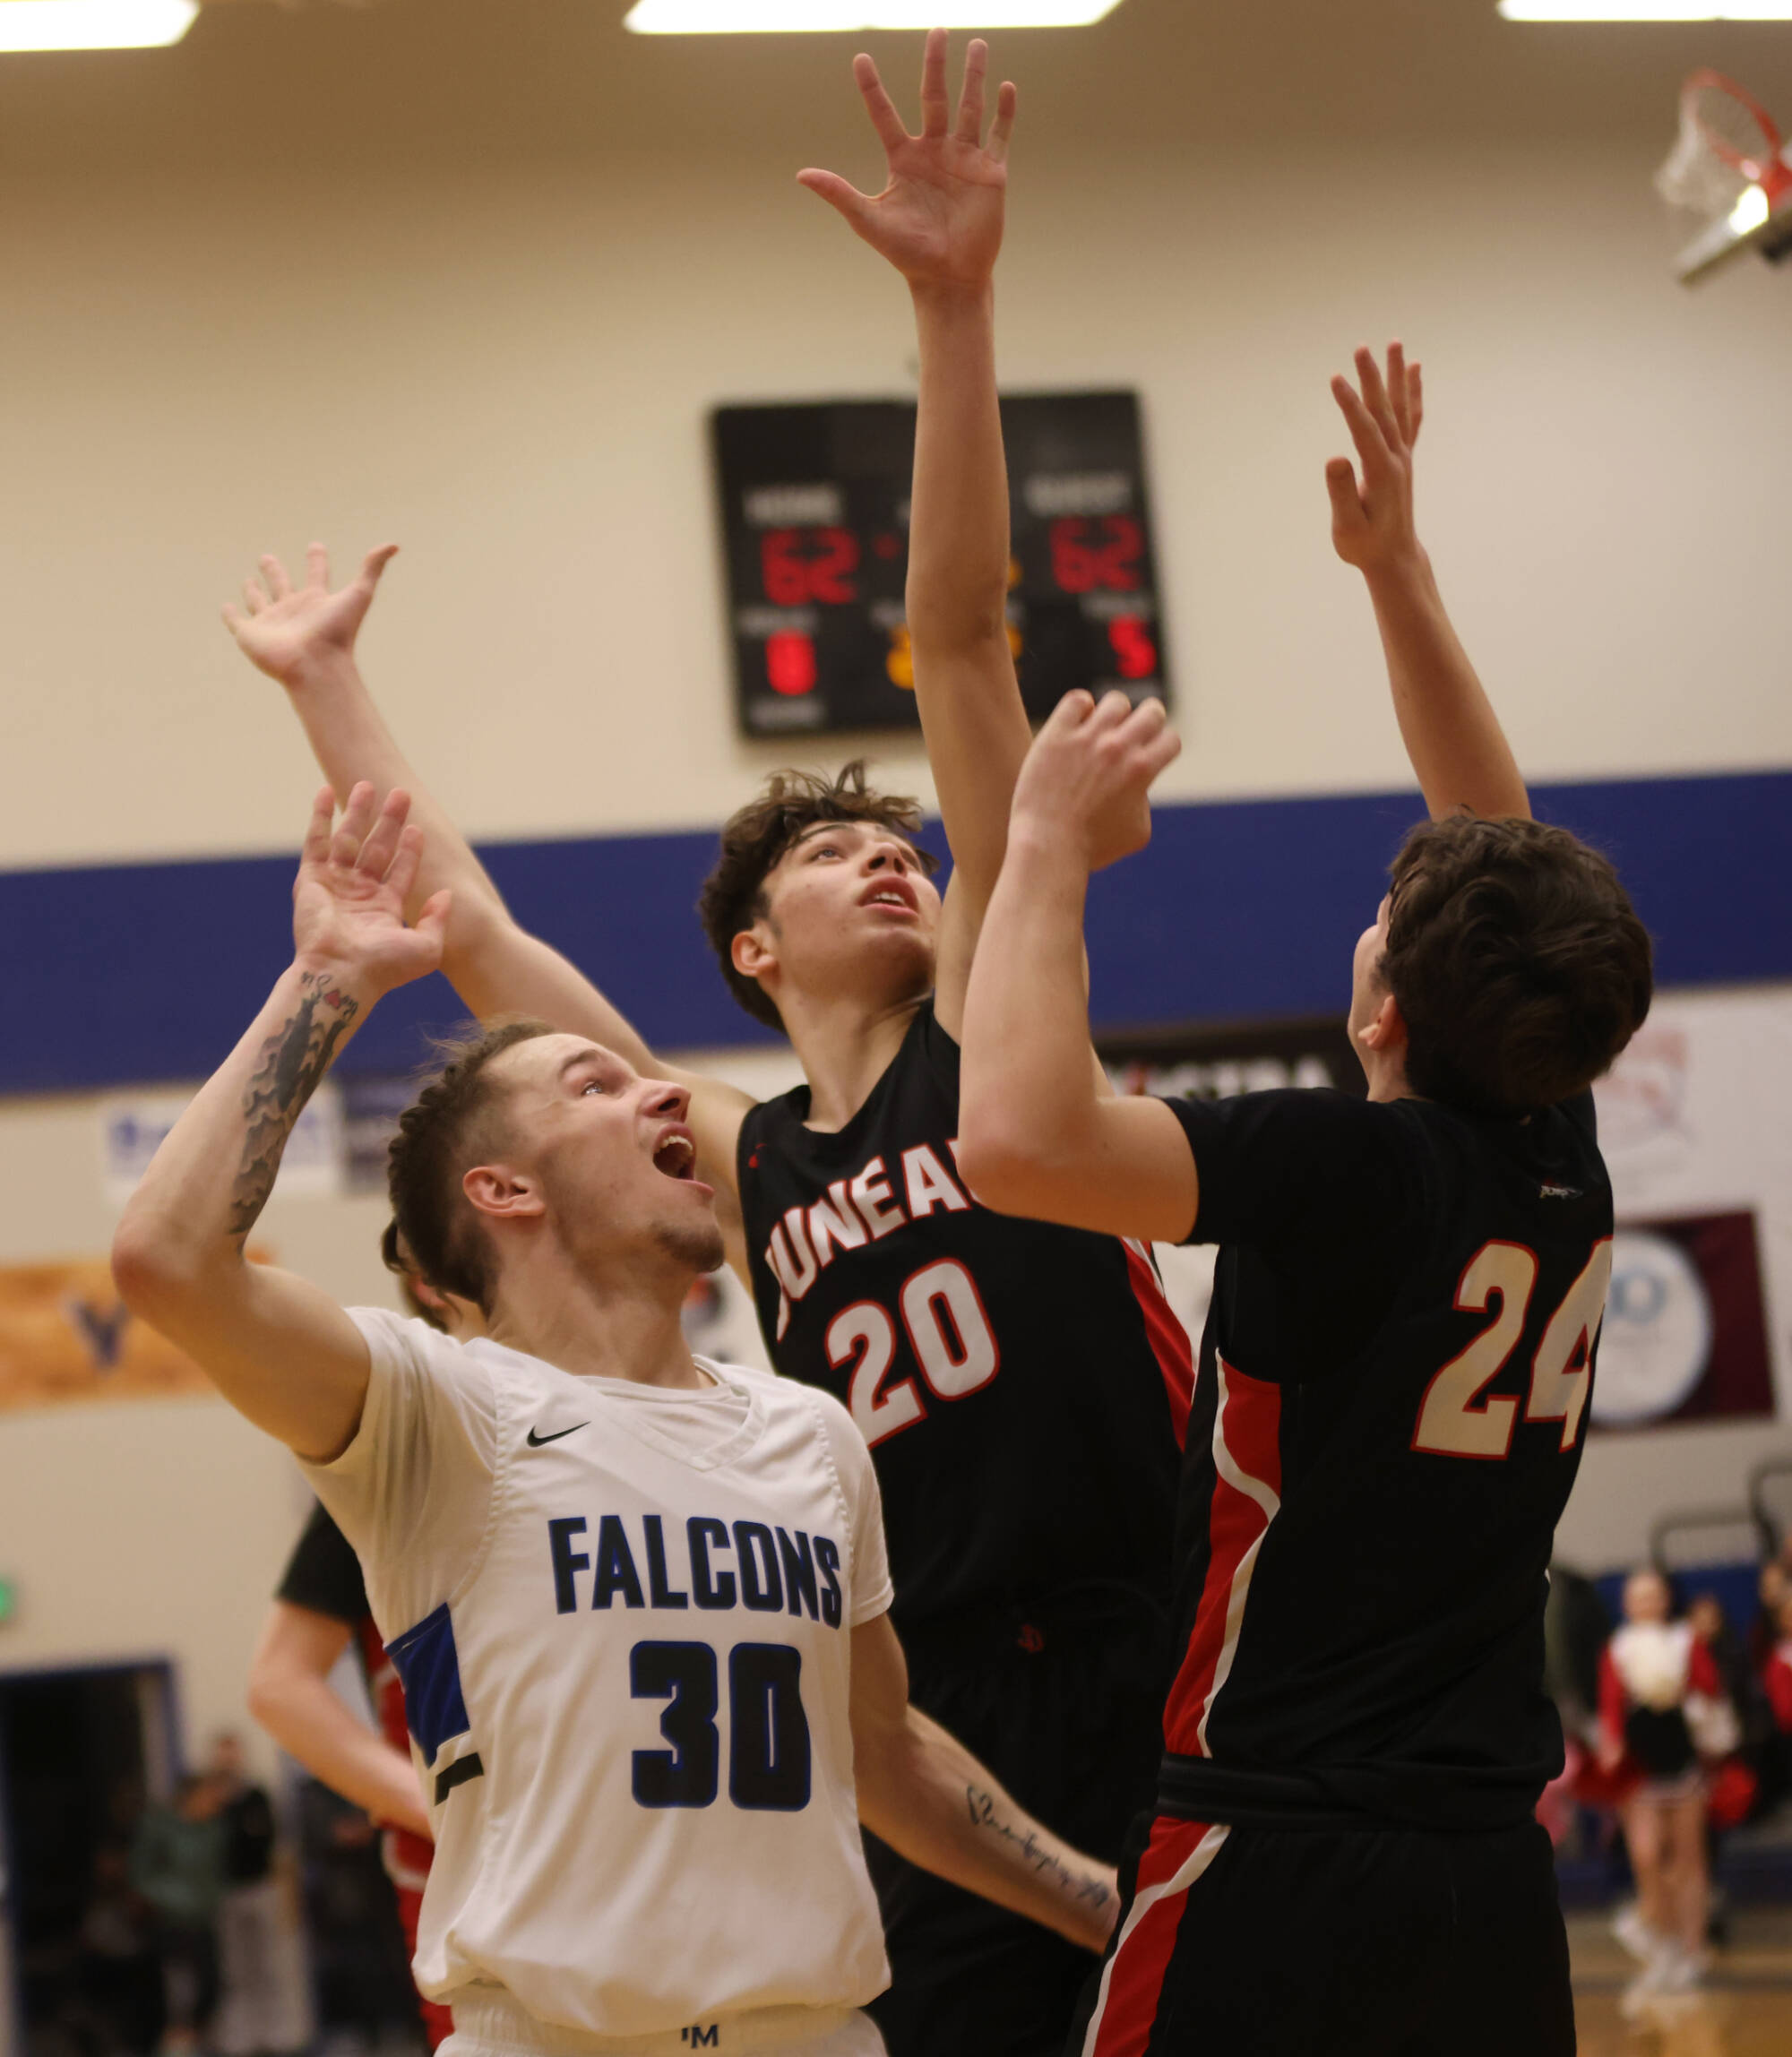 Ben Hohenstatt / Juneau Empire 
TMHS junior Thomas Baxter (30) watches as his game-winning shot makes its way past the arms of JDHS senior Orion Dybdahl (20) and JDHS senior Kai Hargrave (24) who contested the shot closely.